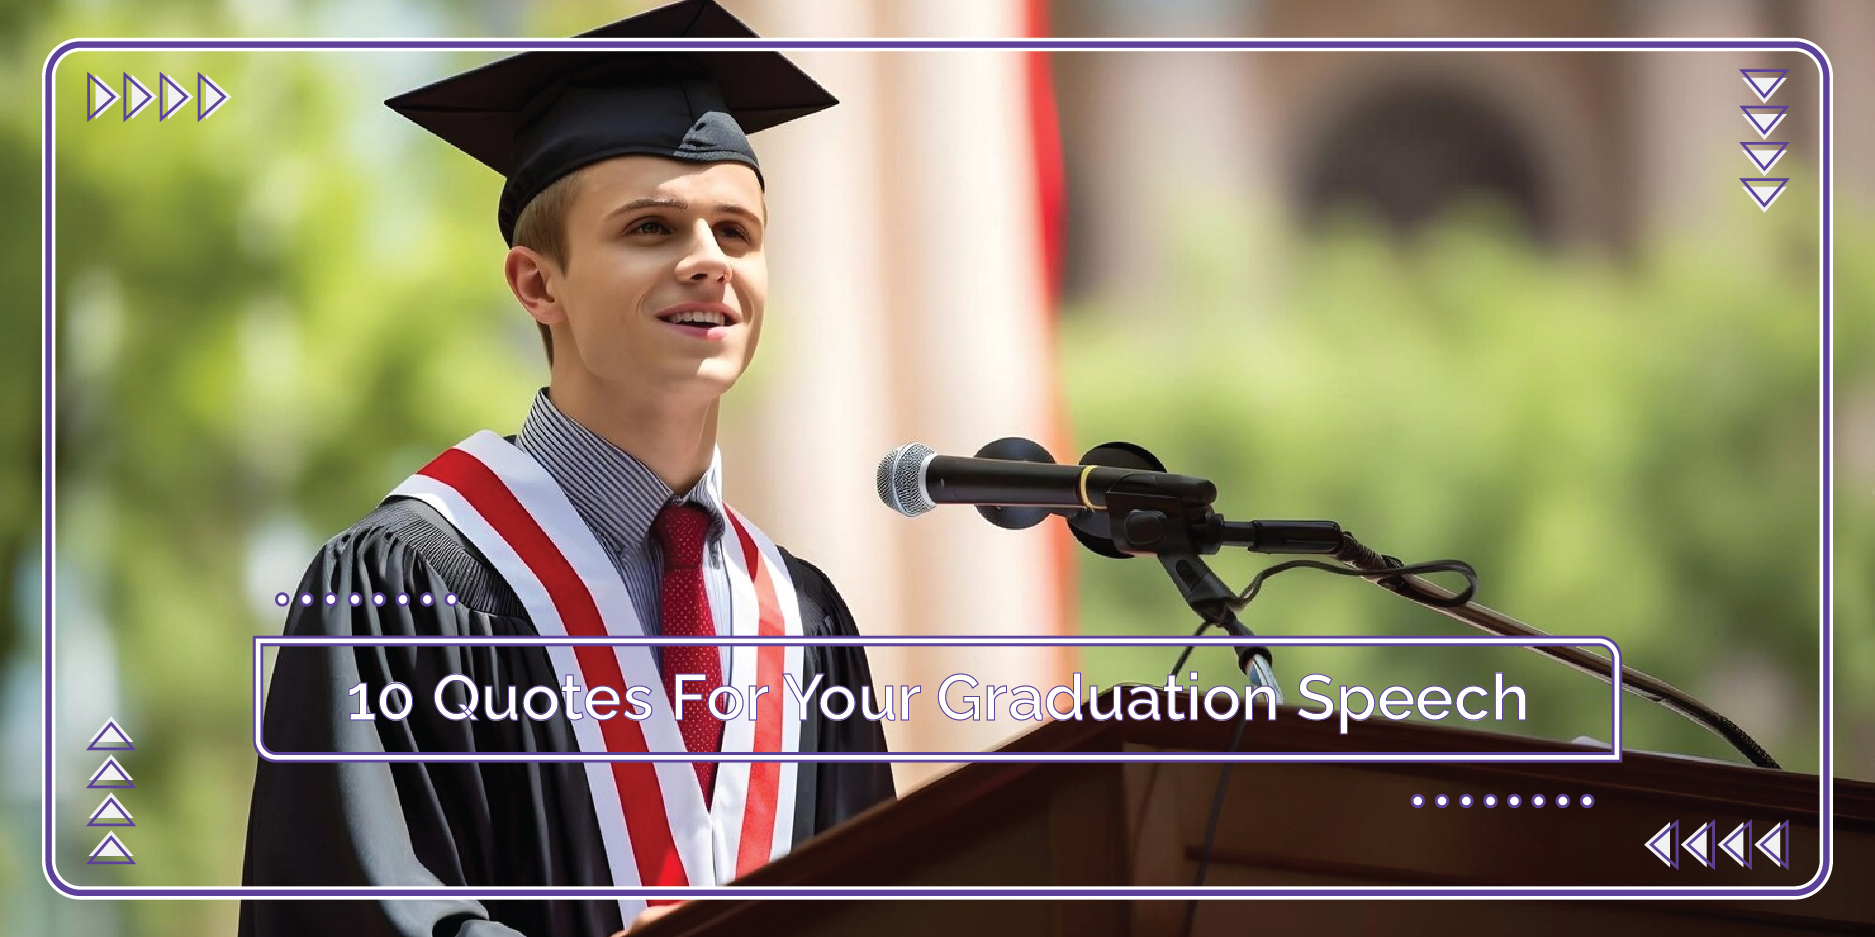 10 Quotes For Your Graduation Speech